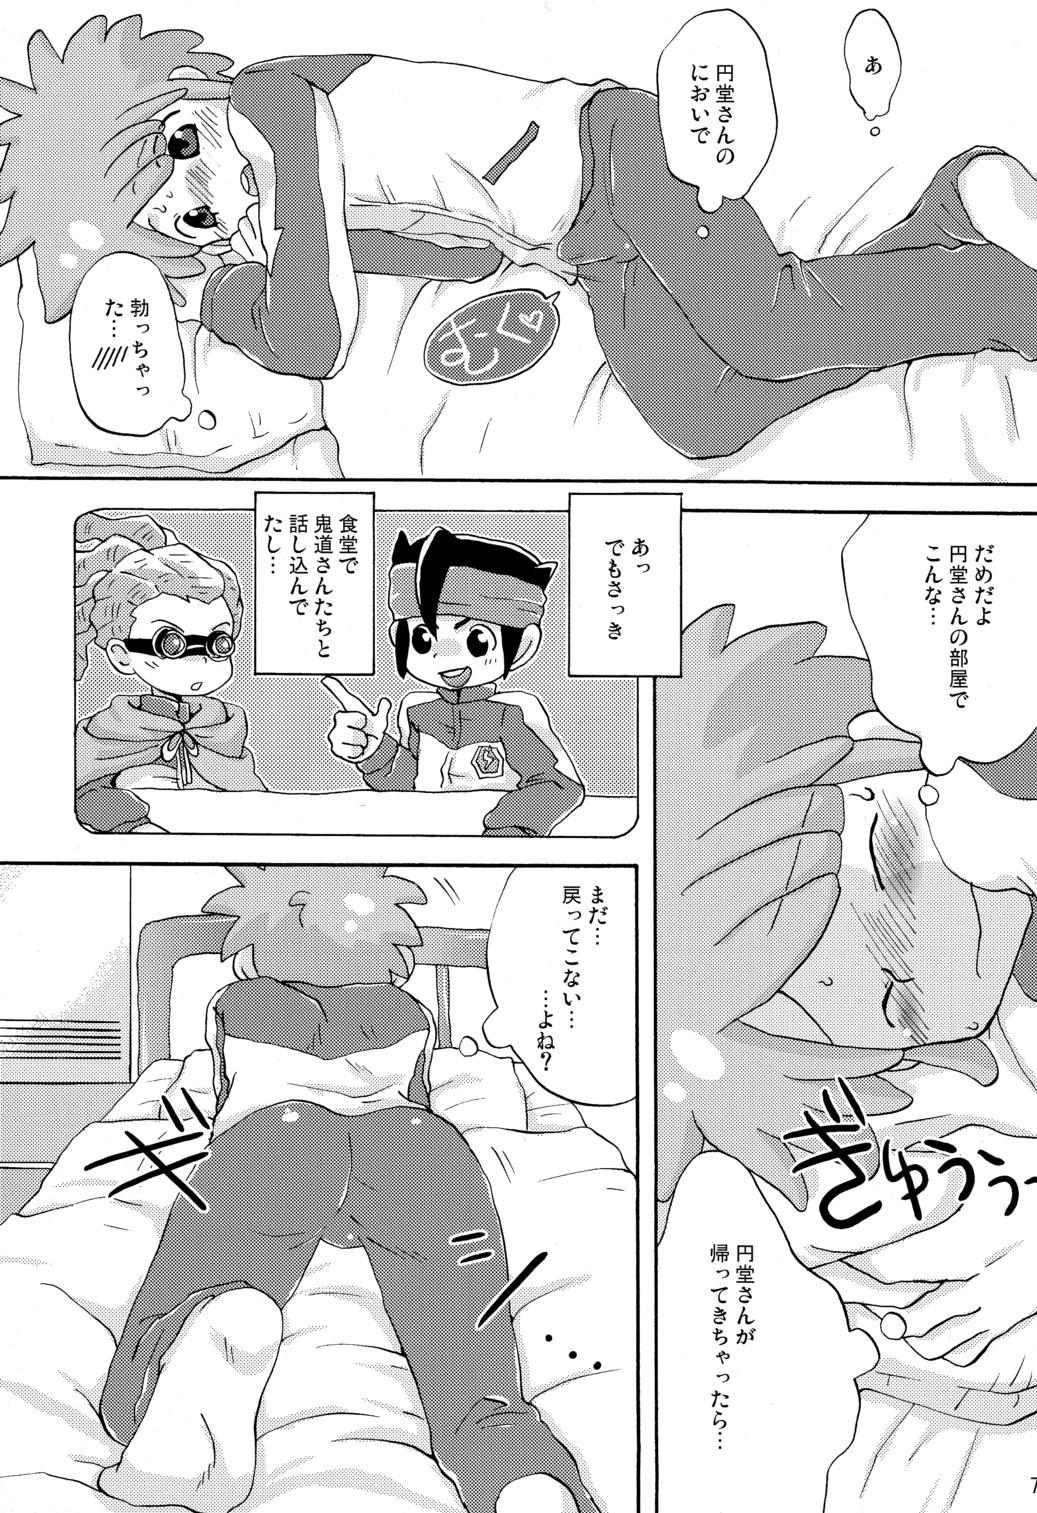 Cowgirl SWEET ROOM - Inazuma eleven Casting - Page 7